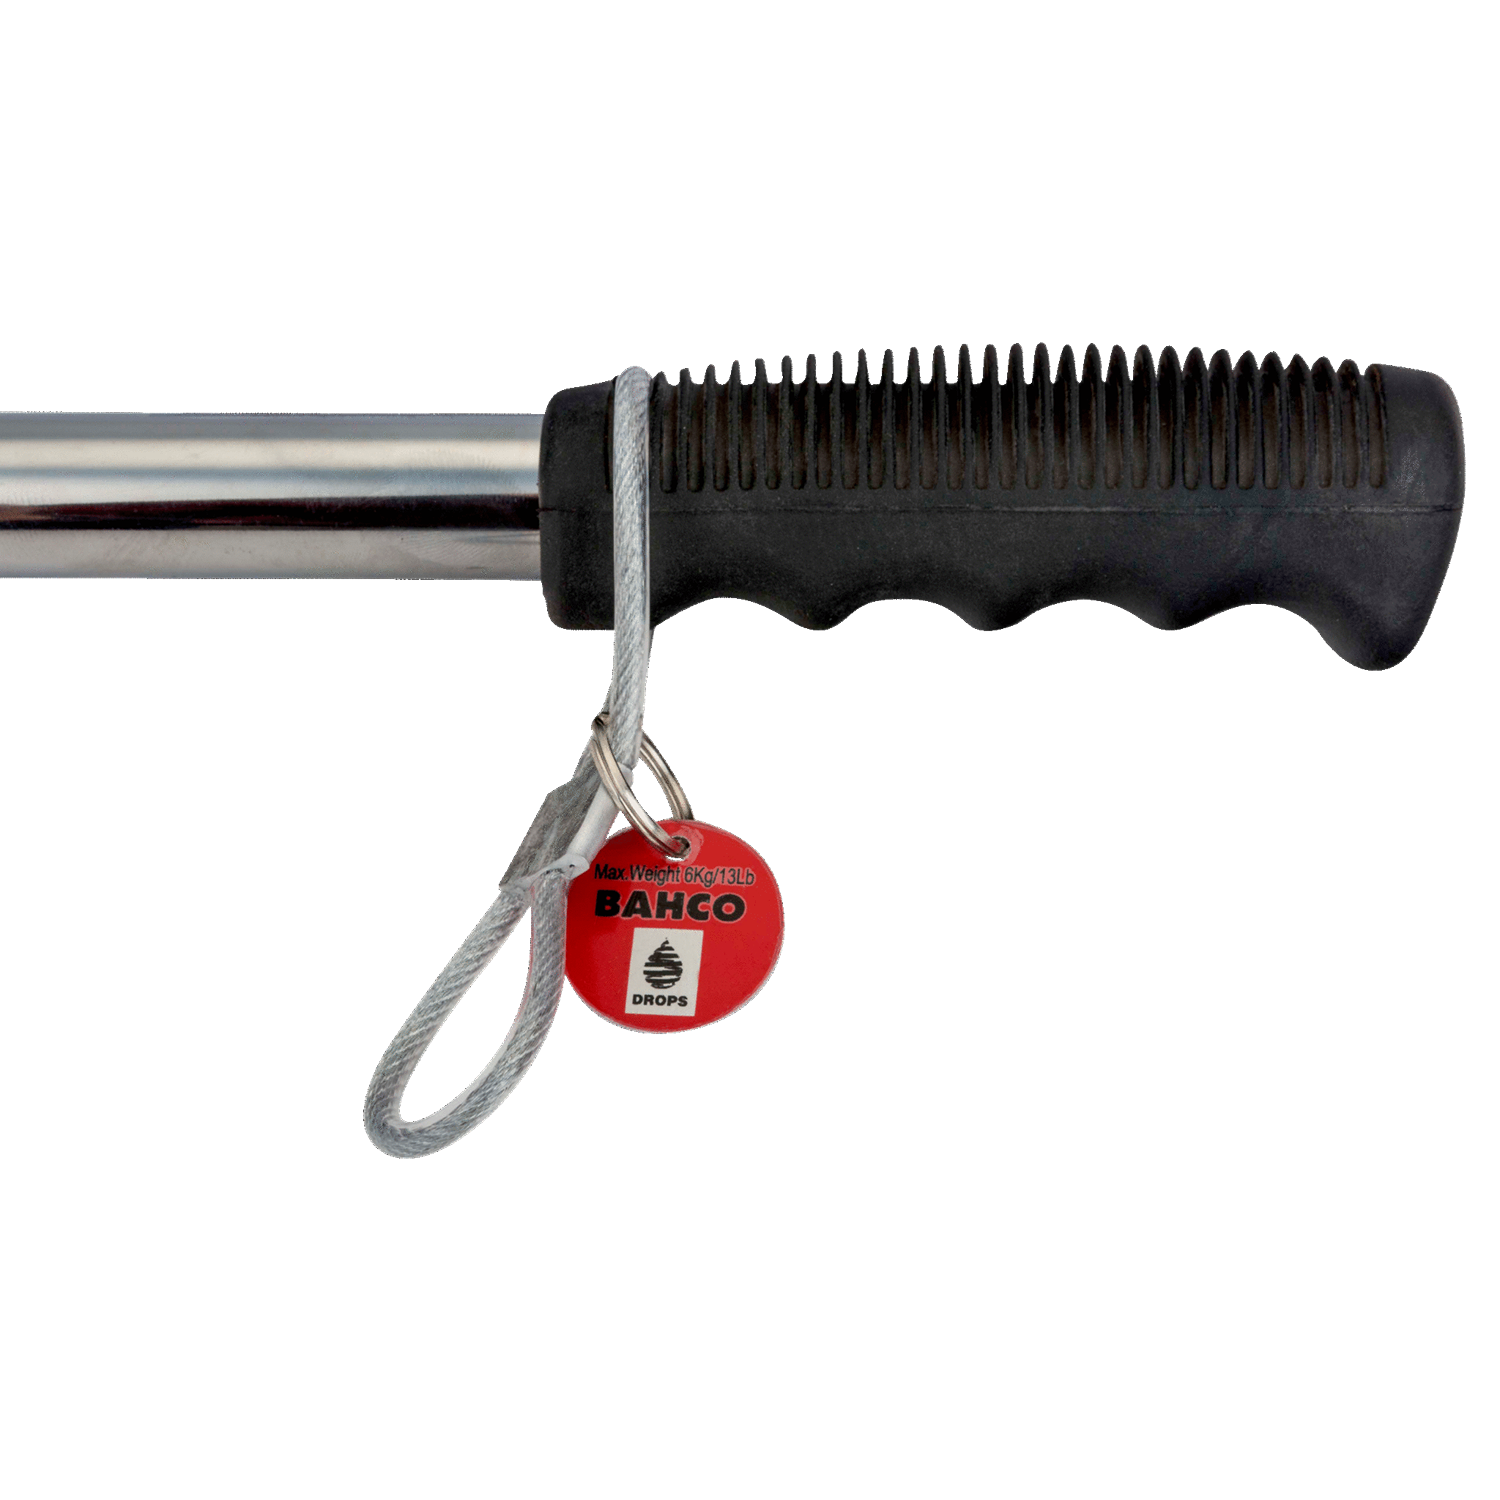 BAHCO TAH8953 3/4” Square Drive Universal Handle with Loop Wire - Premium Universal Handle from BAHCO - Shop now at Yew Aik.